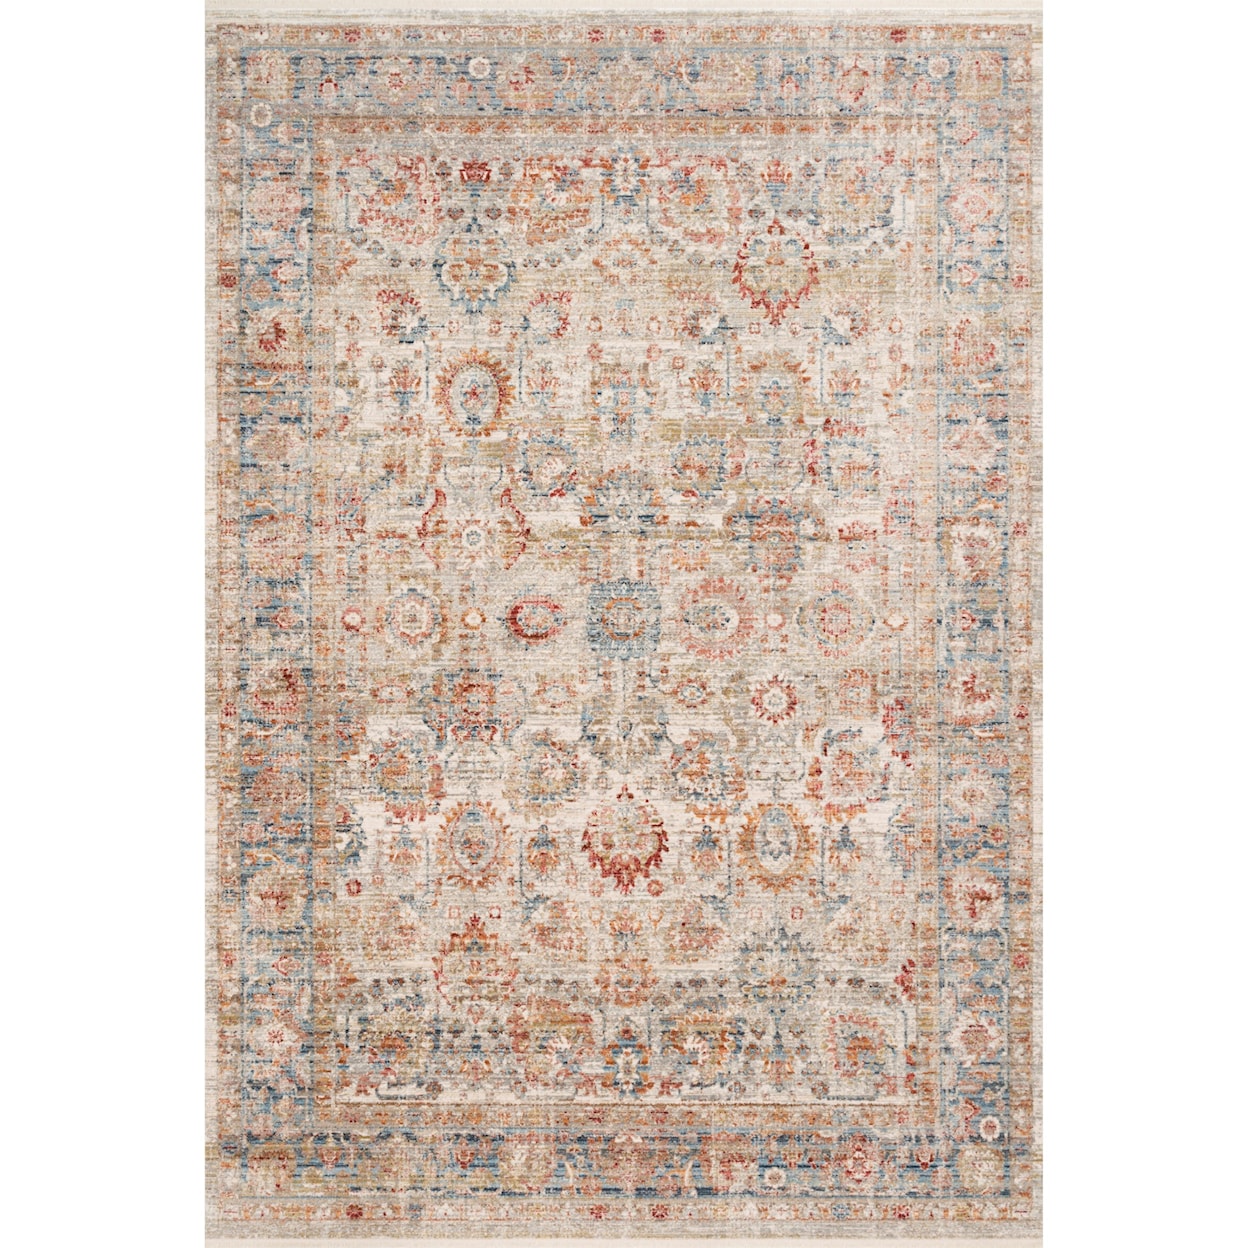 Loloi Rugs Claire 2'7" x 9'6" Ivory / Ocean Rug